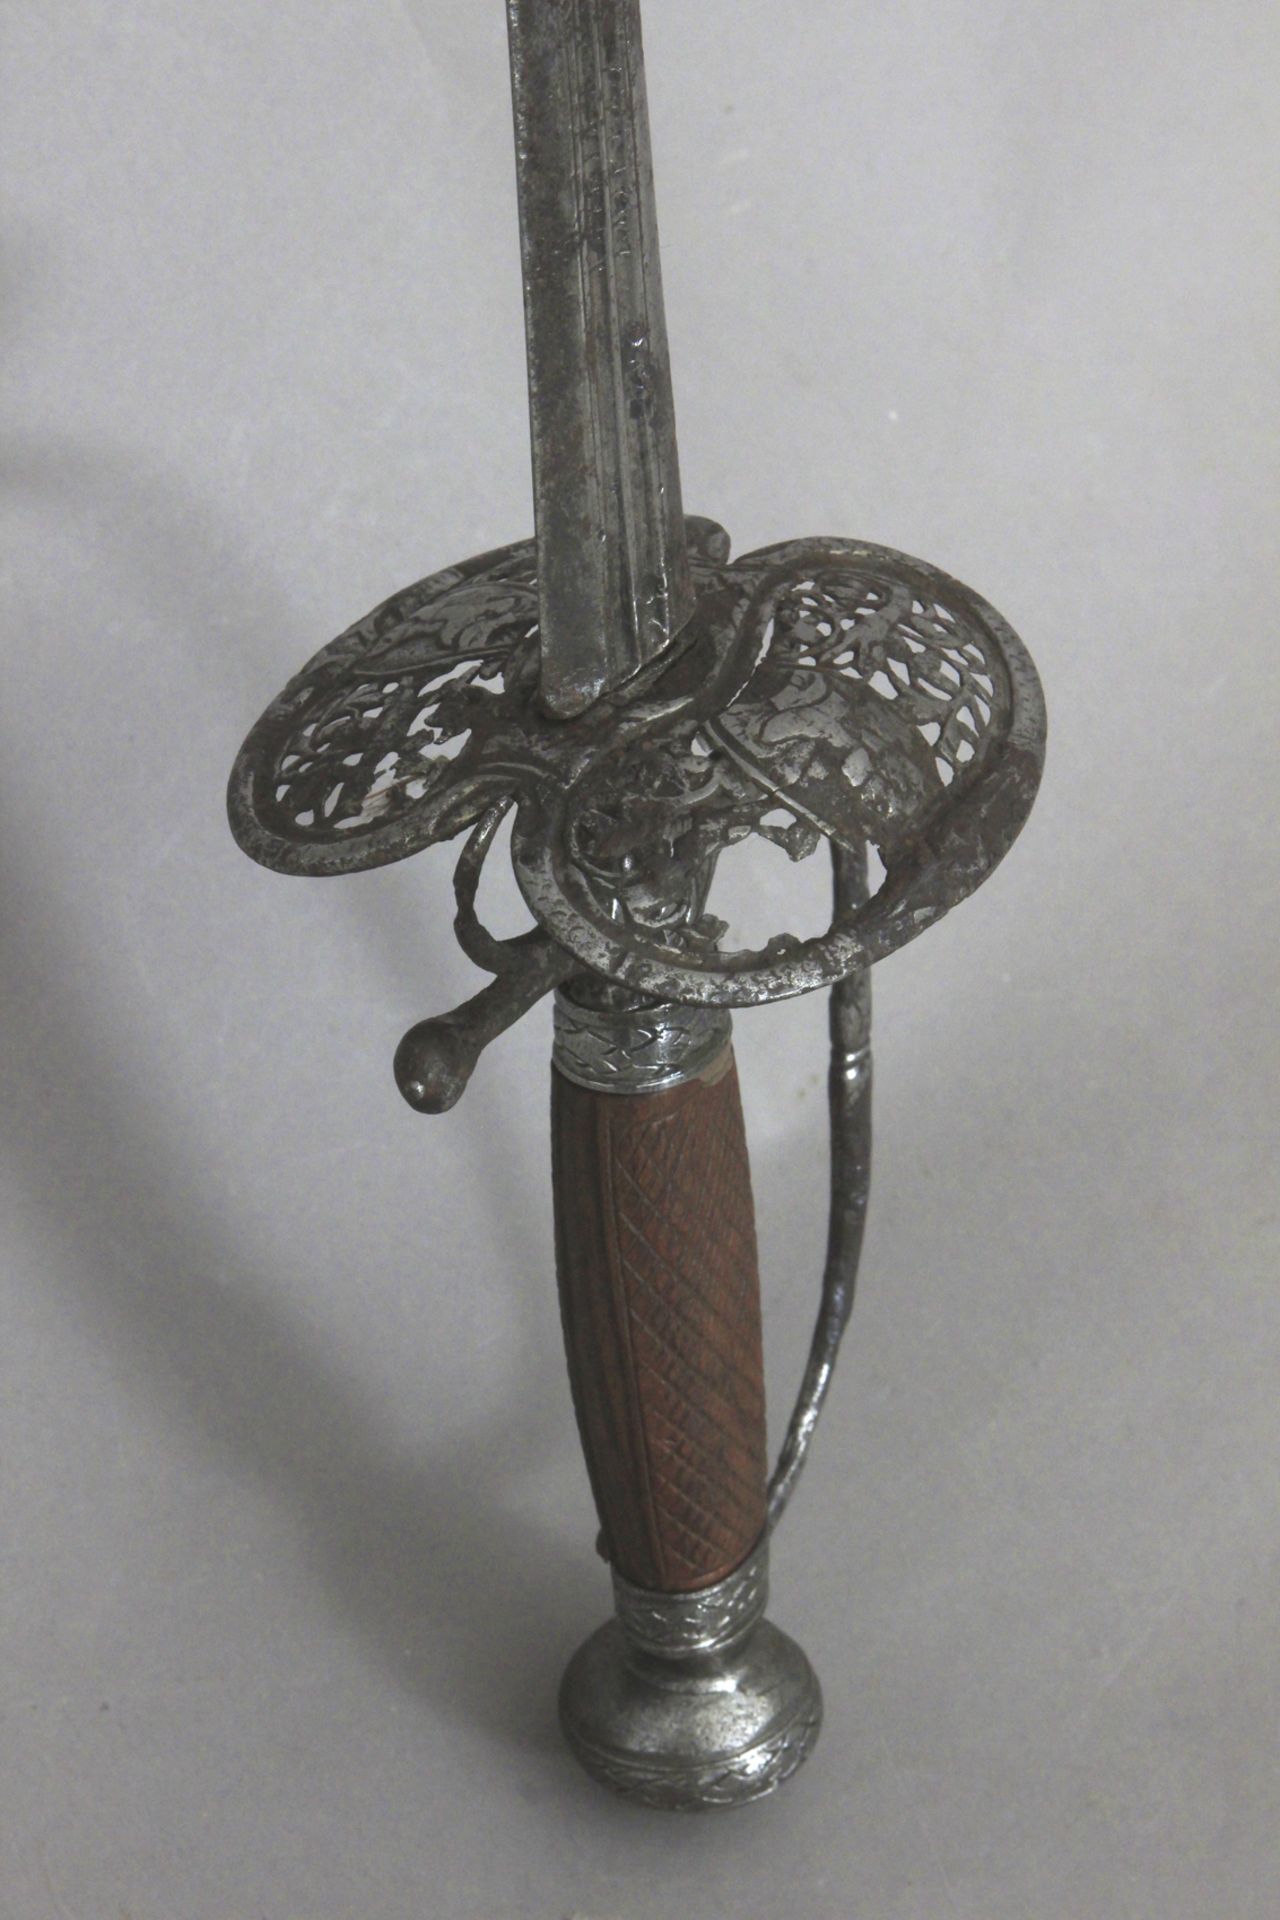 An 18th century ceremonial sword with a blade possibly from Toledo